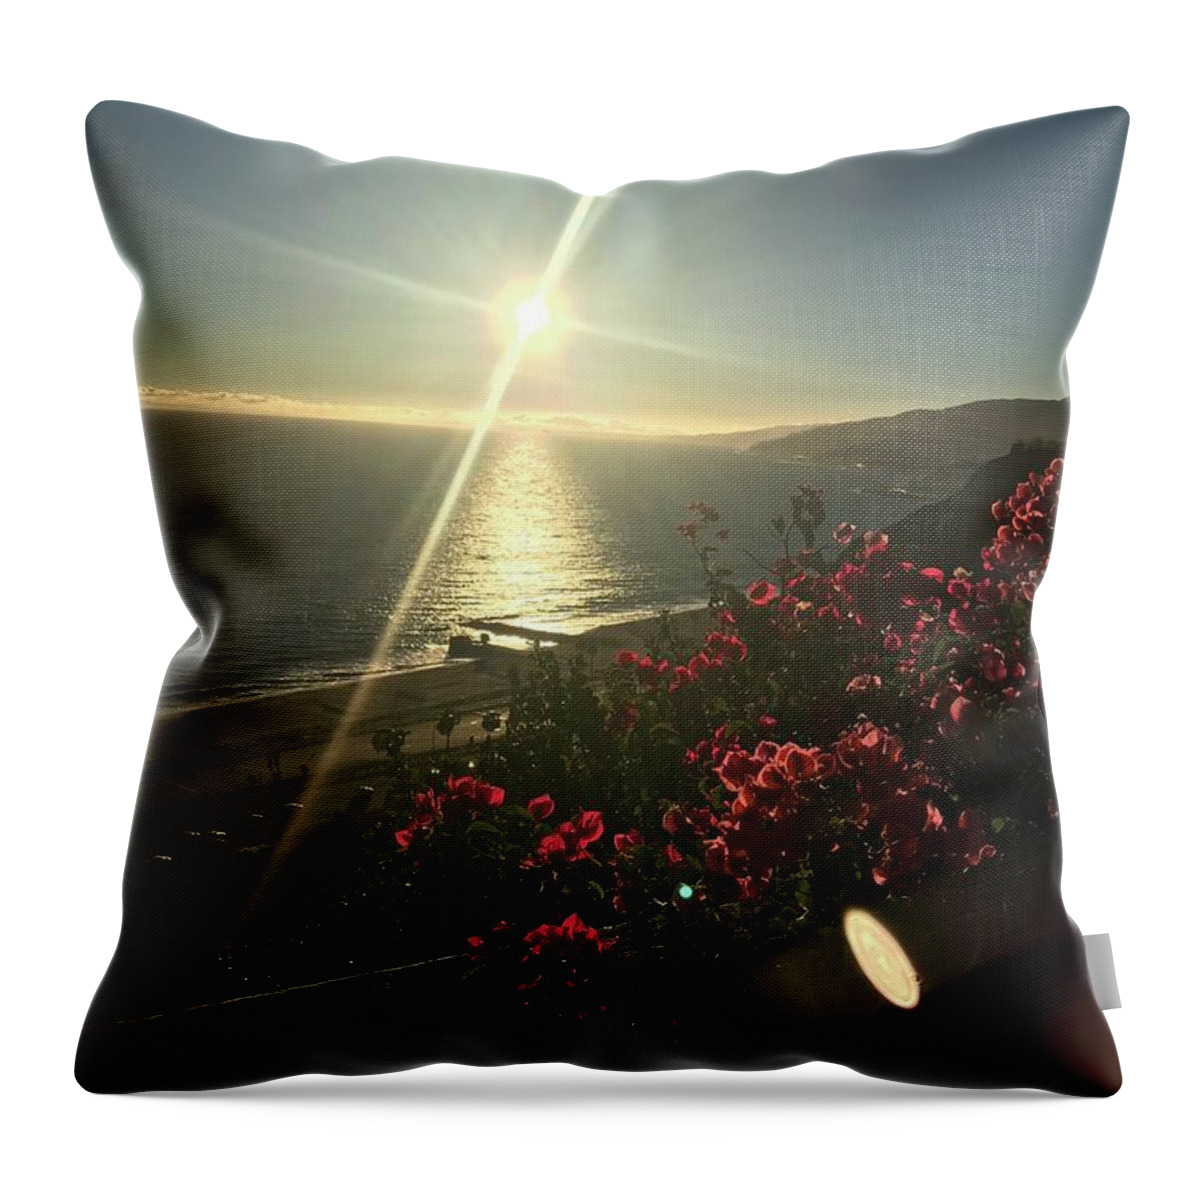 Photography Throw Pillow featuring the photograph Sunset In Malibu by Lisa White